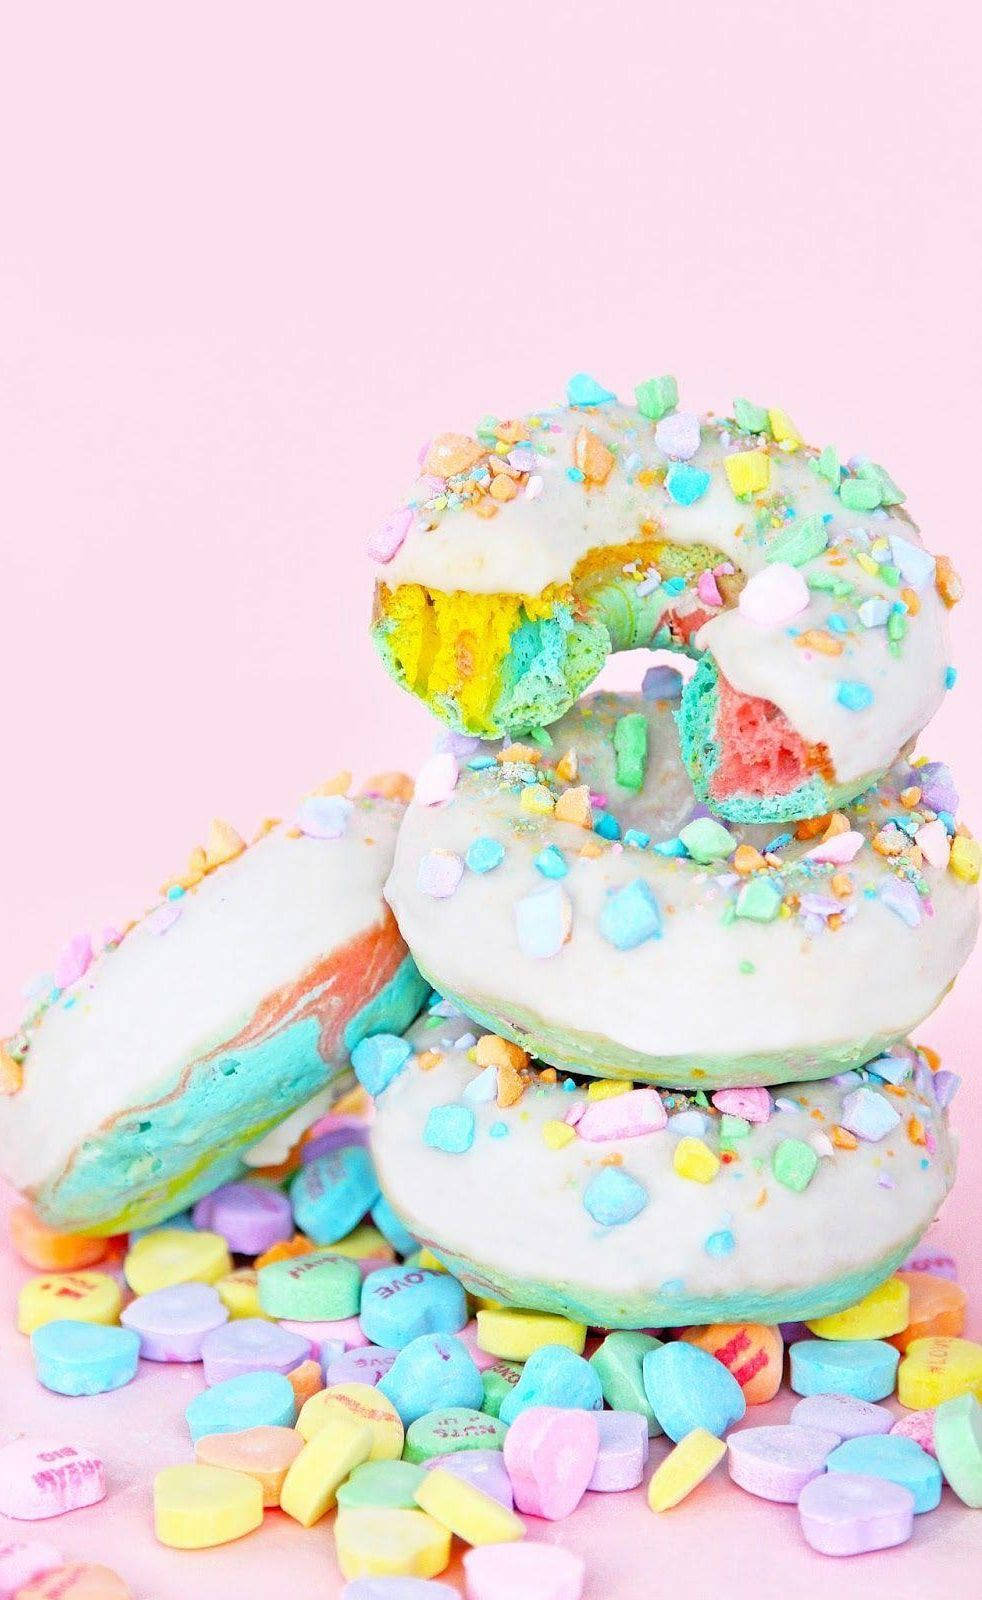 Colorful Candy Cookie Iphone Wallpaper